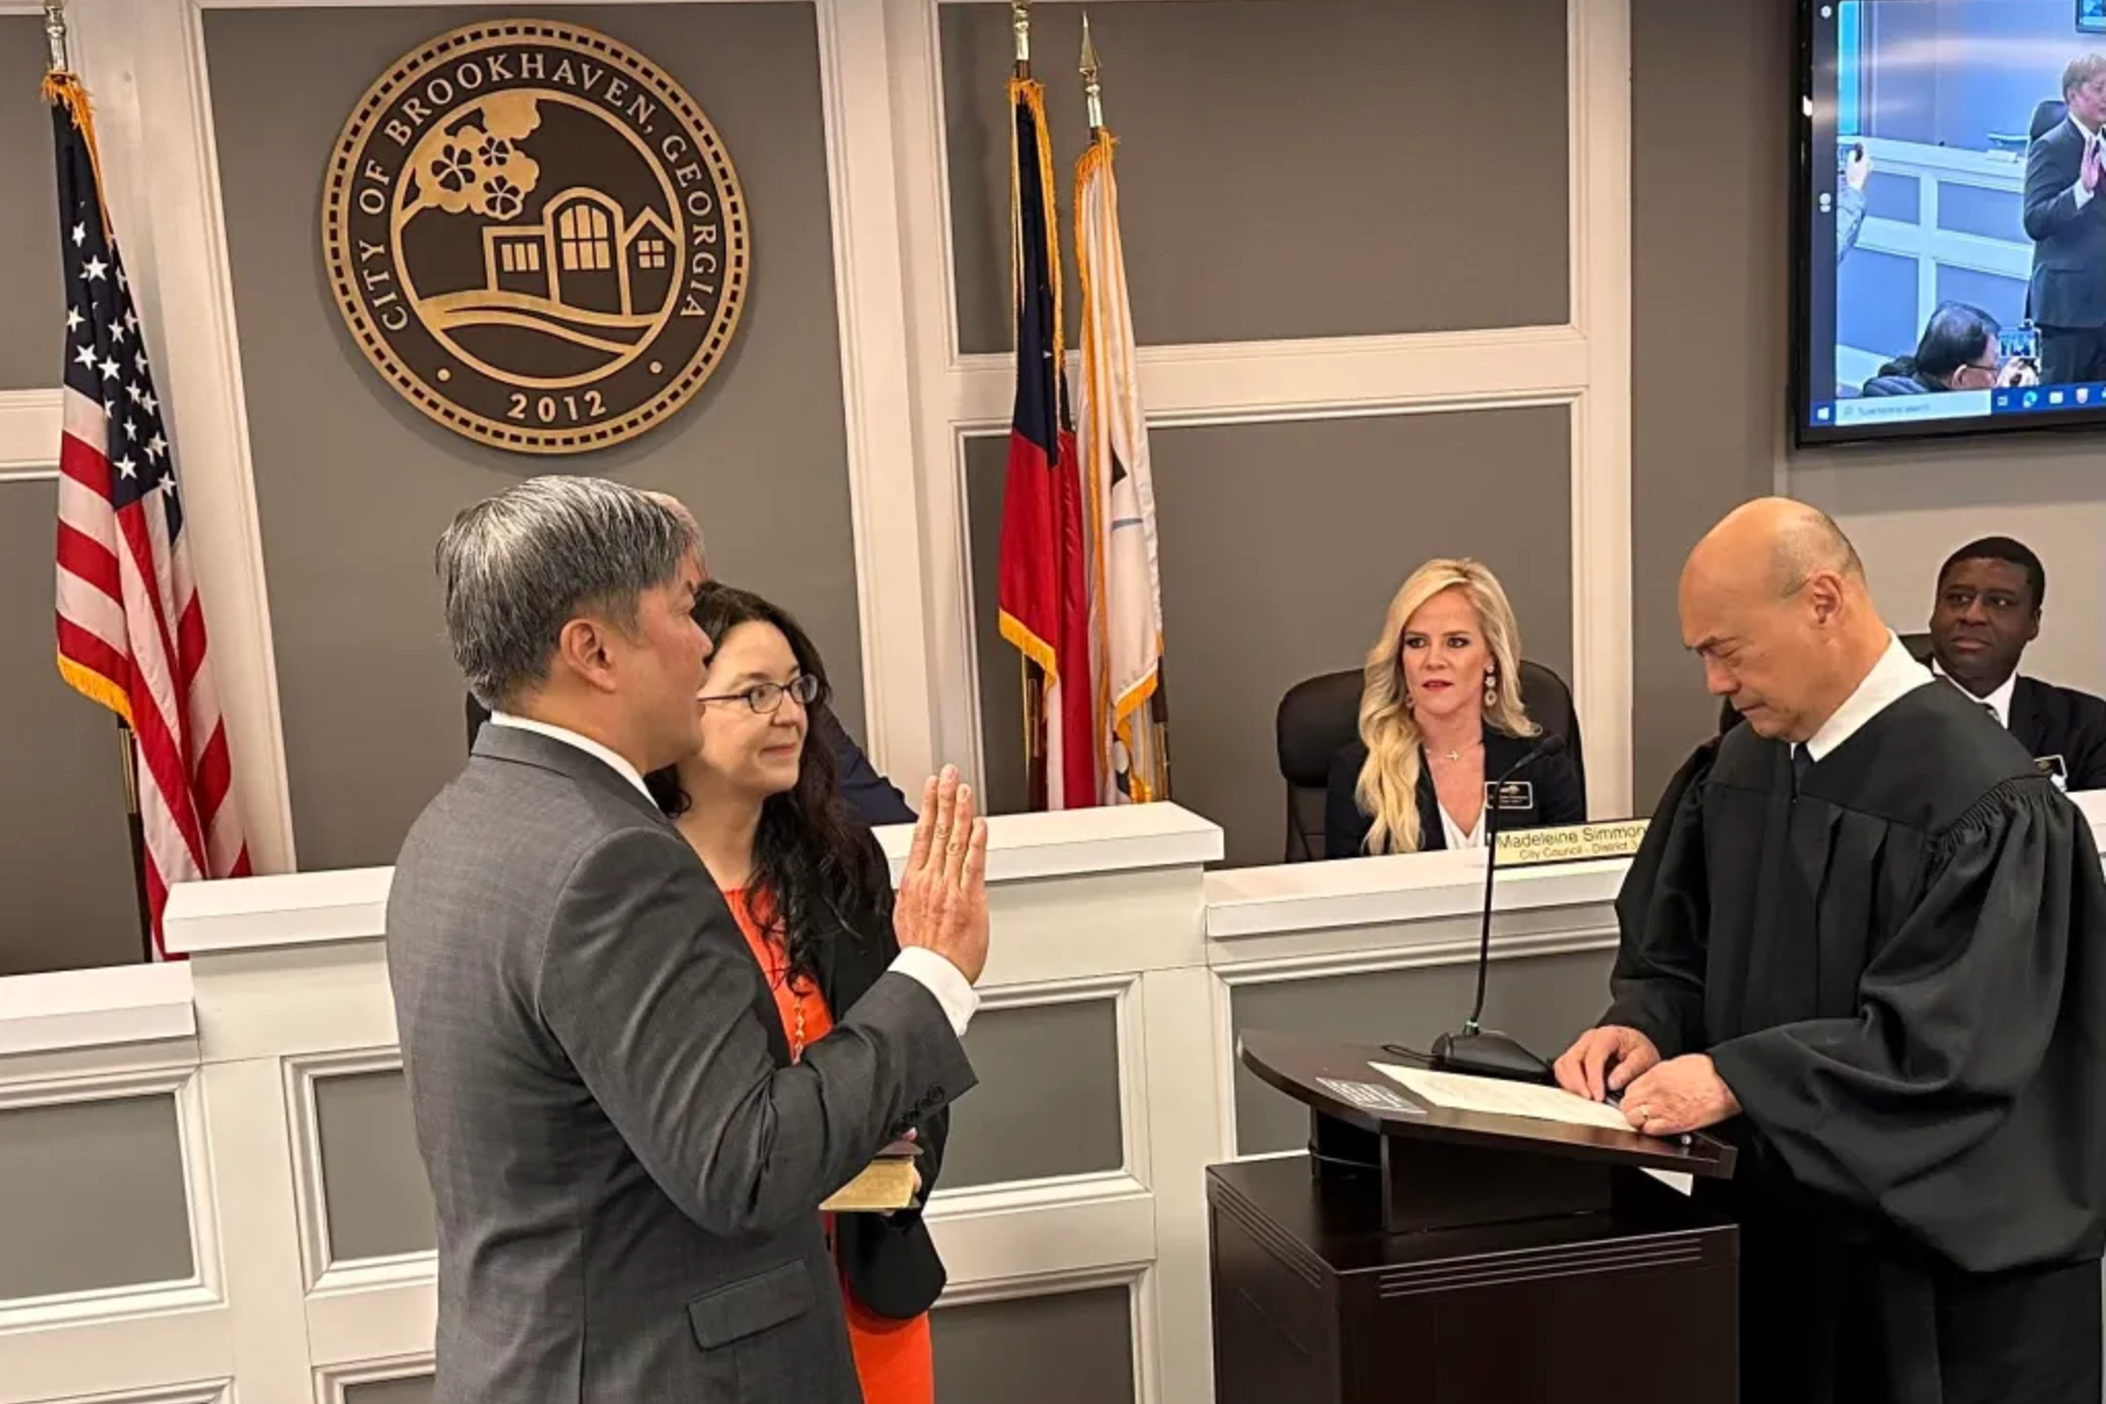 Brookhaven, Ga. mayor John Park being sworn in with his wife, Morgan Harris, at his swearing in on Jan. 8, 2024.